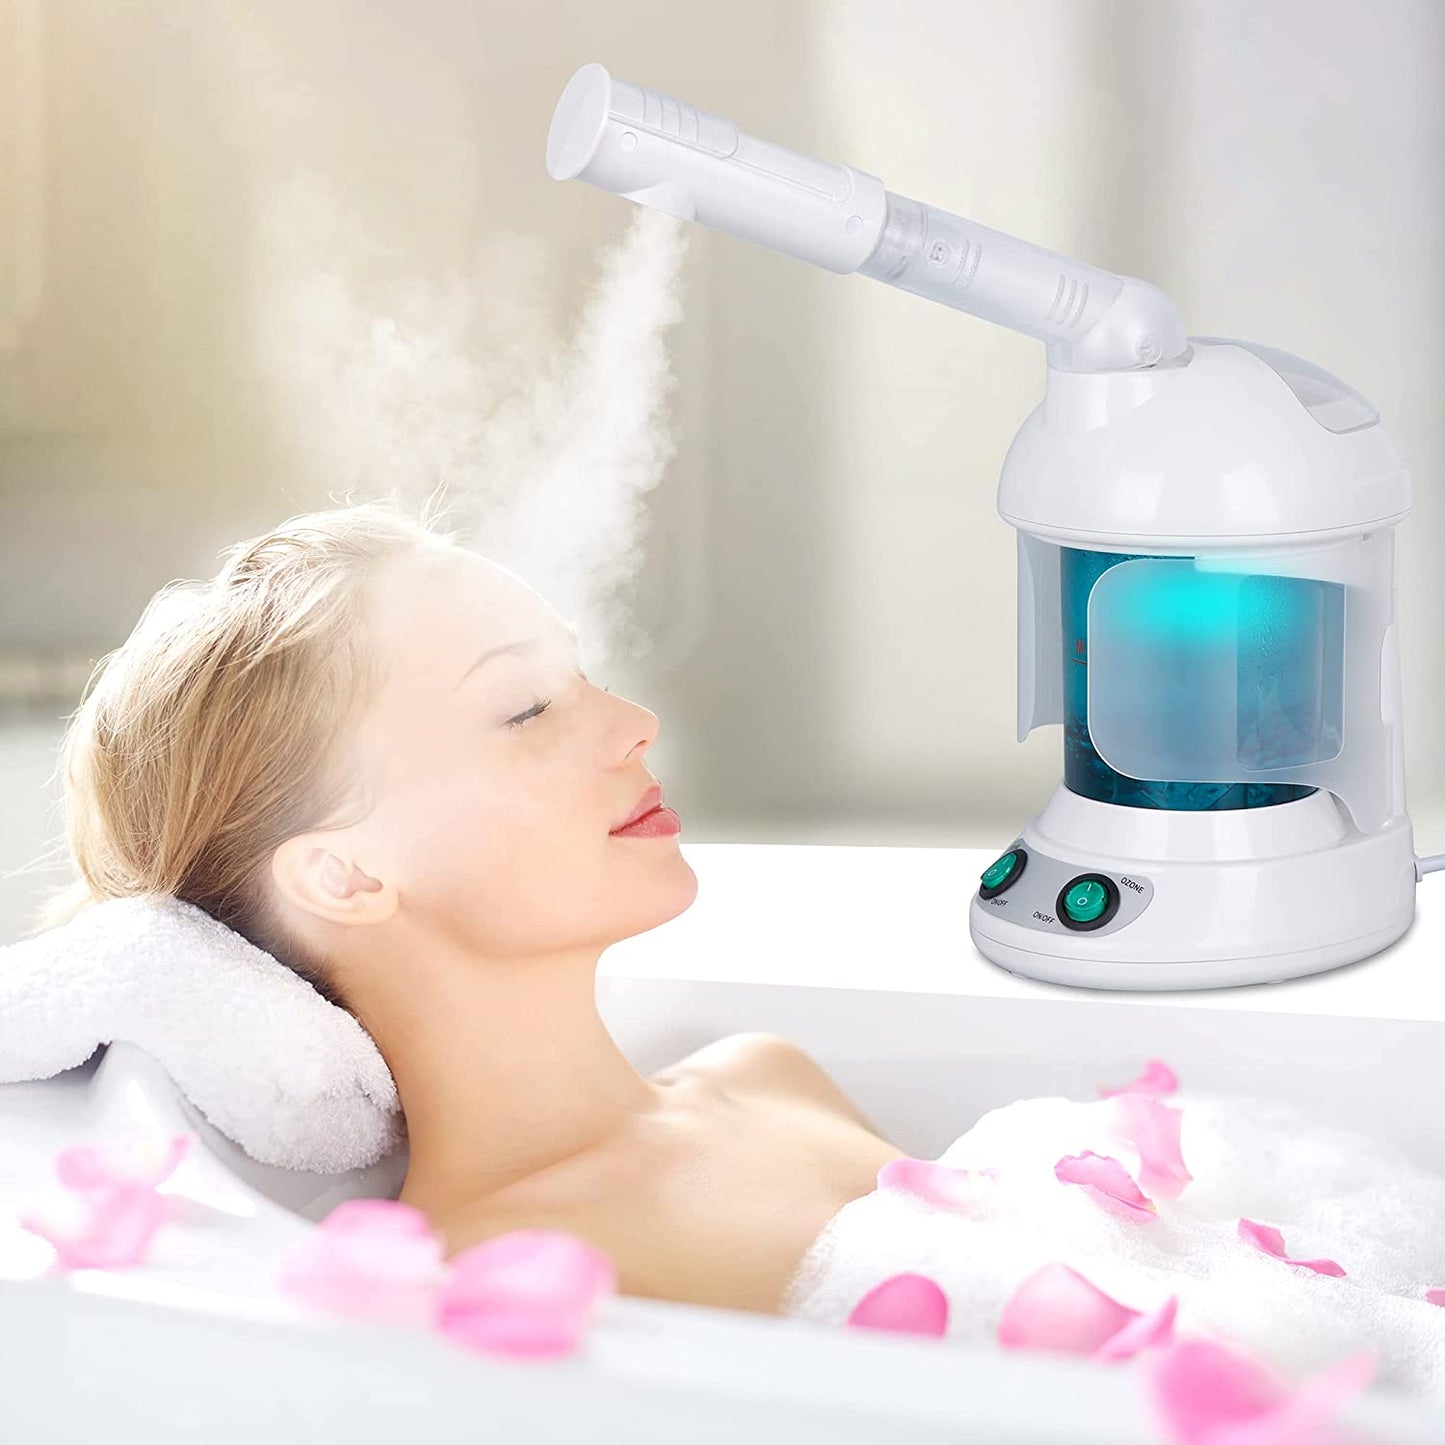 Portable Facial Steamer 2 in 1 Ionic Face Steamer Humidifer and Hair Steamer with Hood Face Steaming Warm Mist Deep Clean for Home Salon Spa